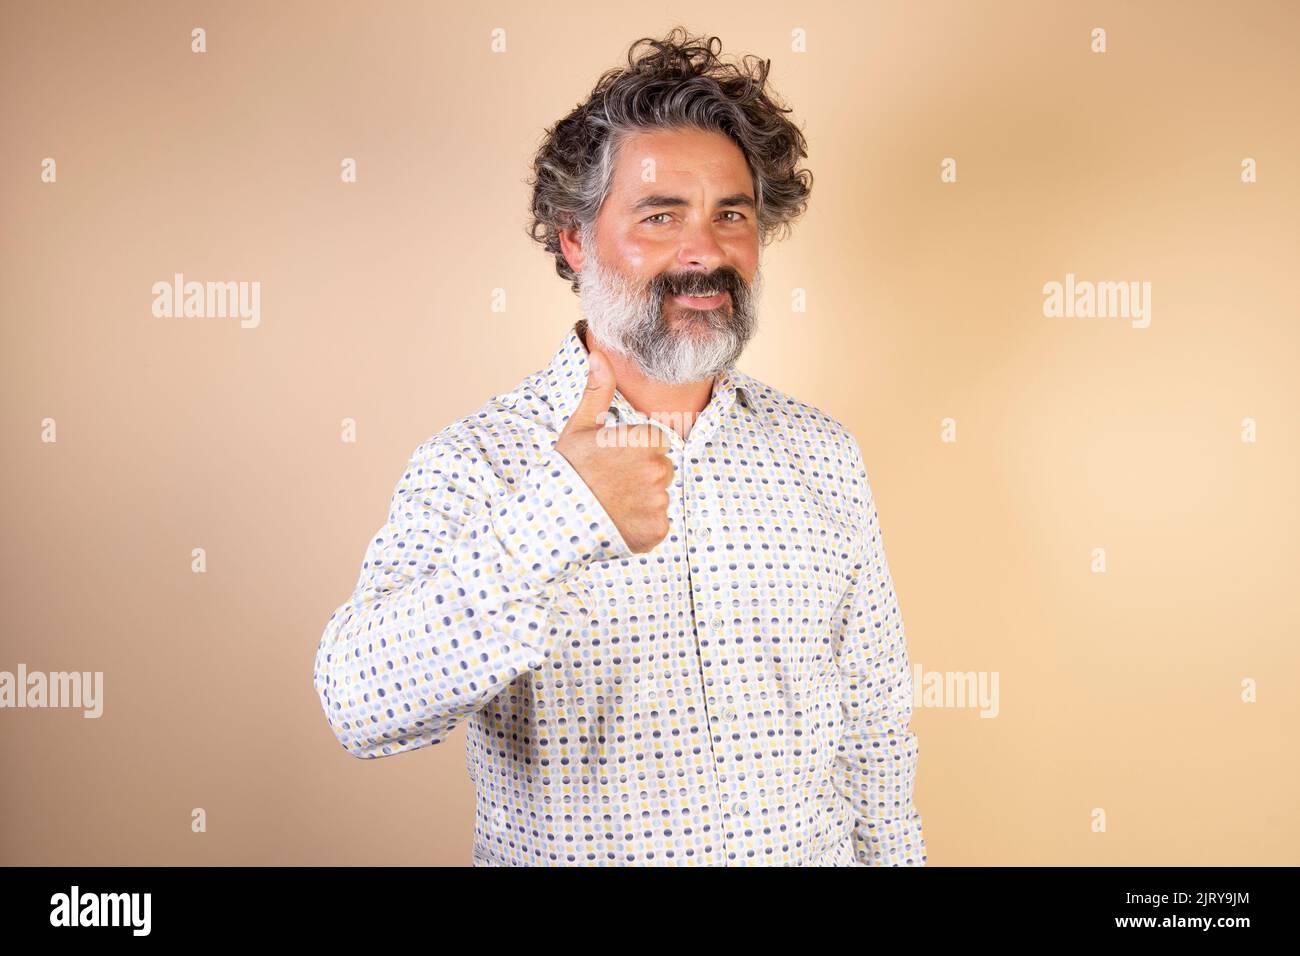 Middle age man with gray hair and beard wearing casual clothes making happy thumbs up gesture with hand. approving expression looking at camera showin Stock Photo